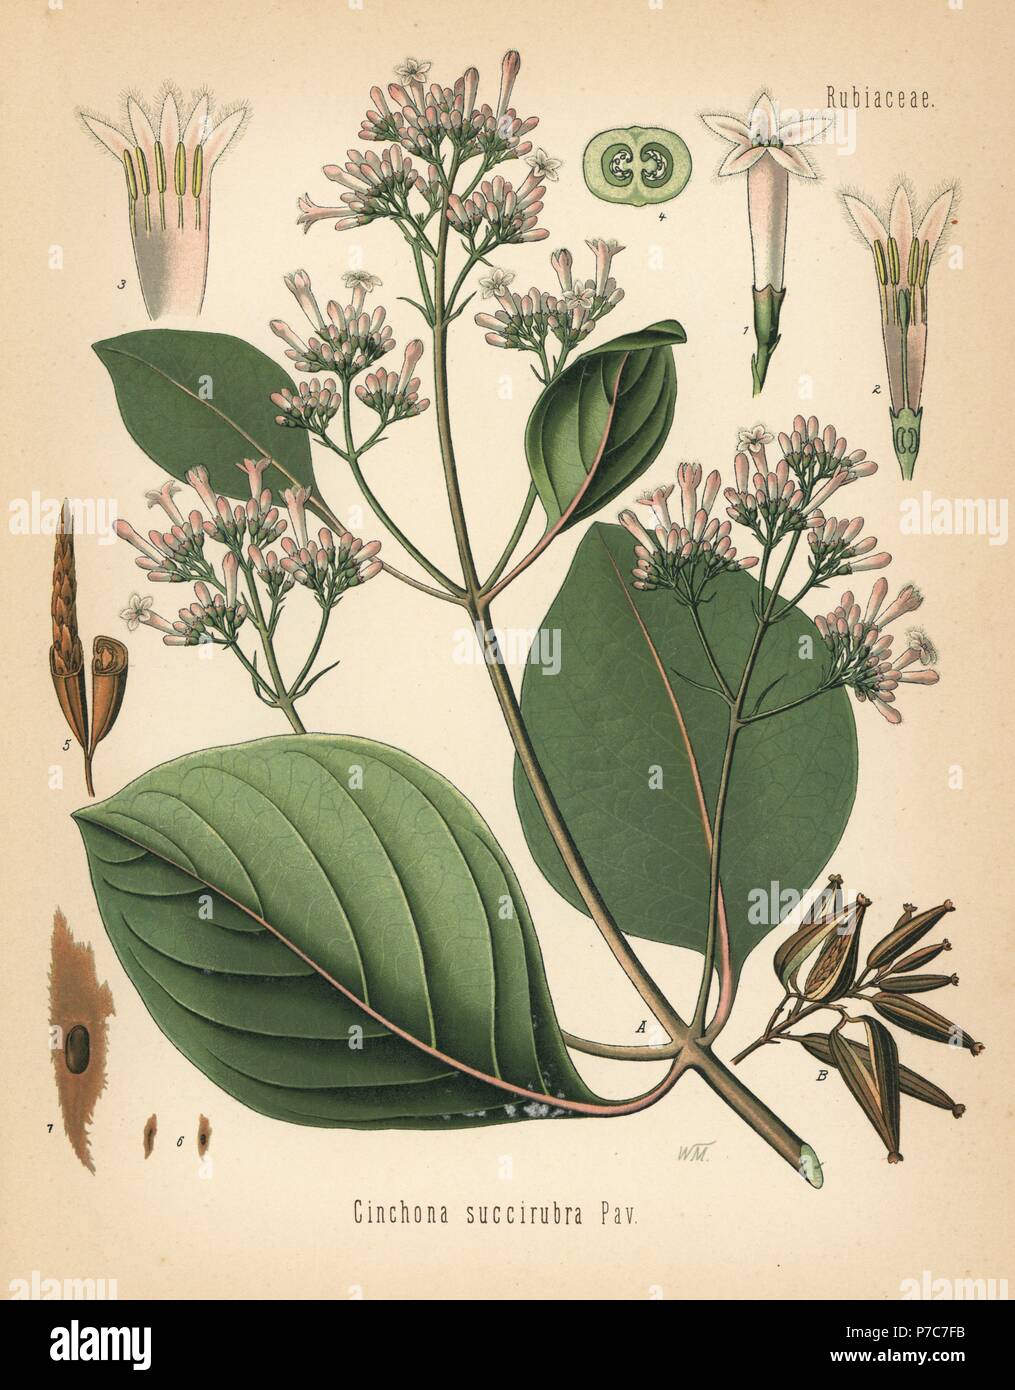 Red cinchona or red quina, Cinchona pubescens (Cinchona succirubra). Chromolithograph after a botanical illustration by Walther Muller from Hermann Adolph Koehler's Medicinal Plants, edited by Gustav Pabst, Koehler, Germany, 1887. Stock Photo